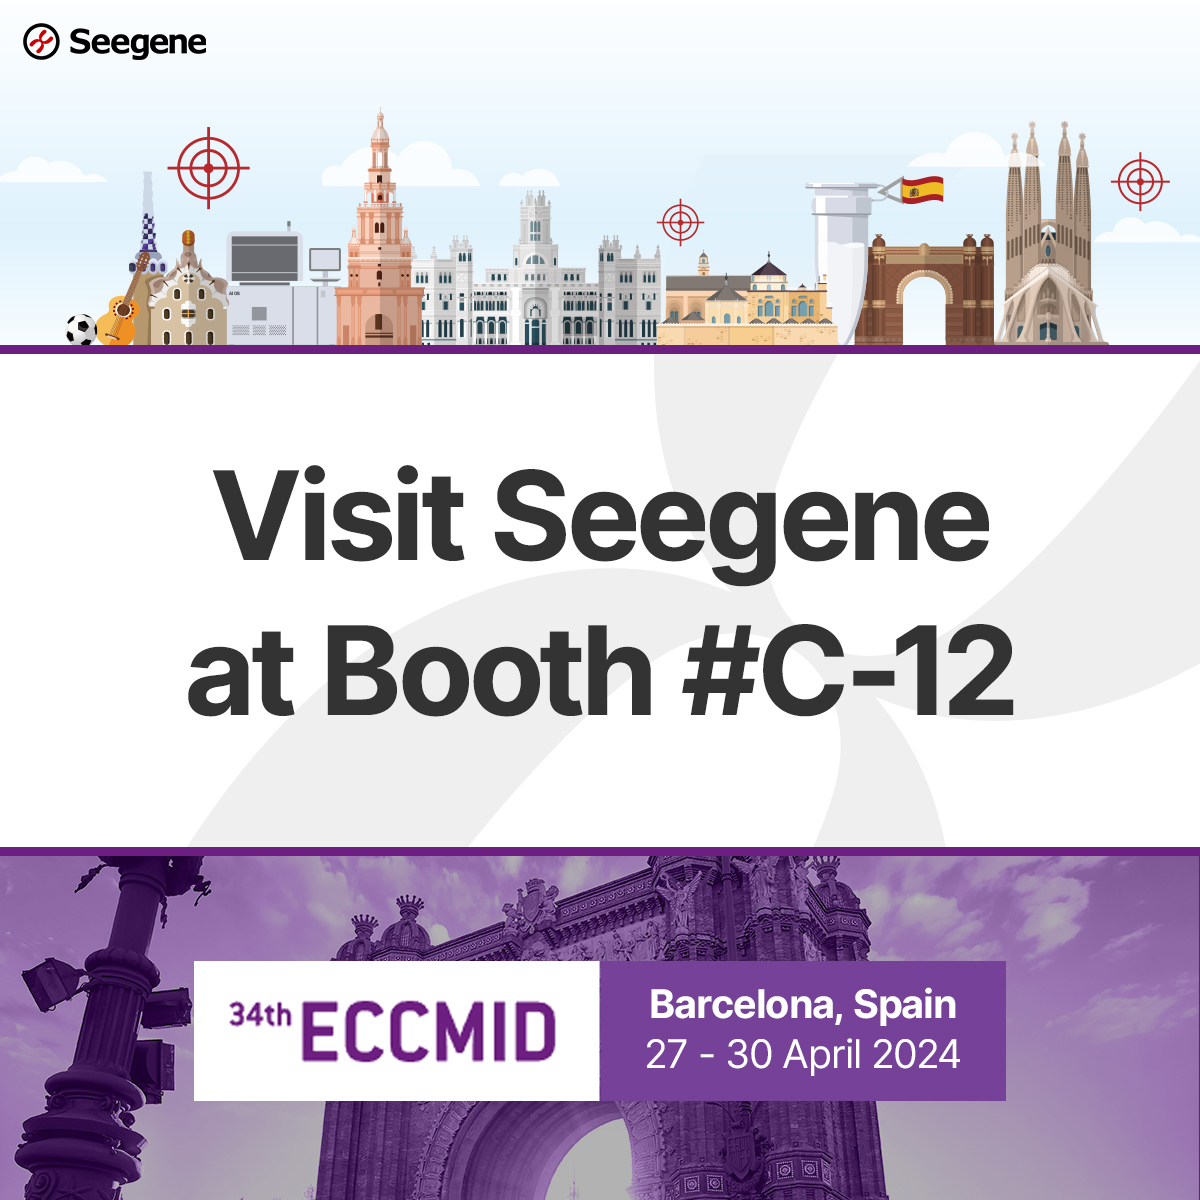 Meet Seegene at #ECCMID 2024, from April 27 to 30 in Barcelona, Spain. Engage in a cutting-edge medical congress while experiencing the irresistible charm of Barcelona, a city that perfectly combines knowledge and adventure. Visit us at booth C-12 for more information! #Seegene…